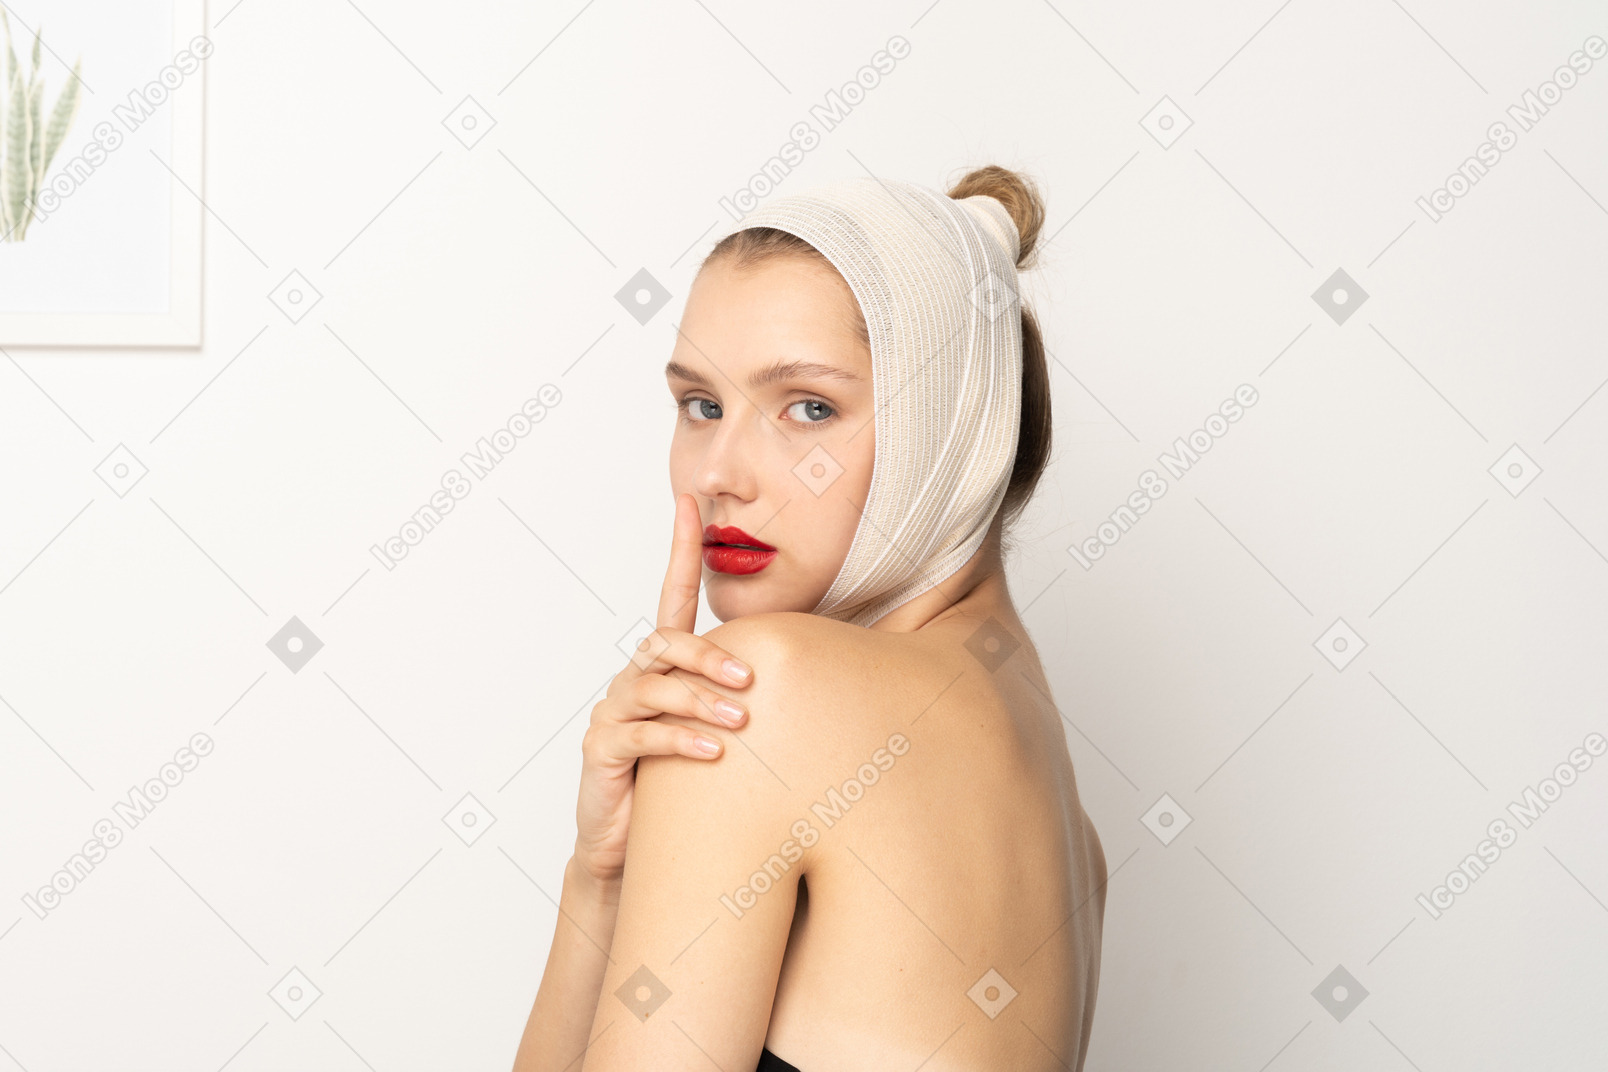 Young woman with head bandage making hush gesture